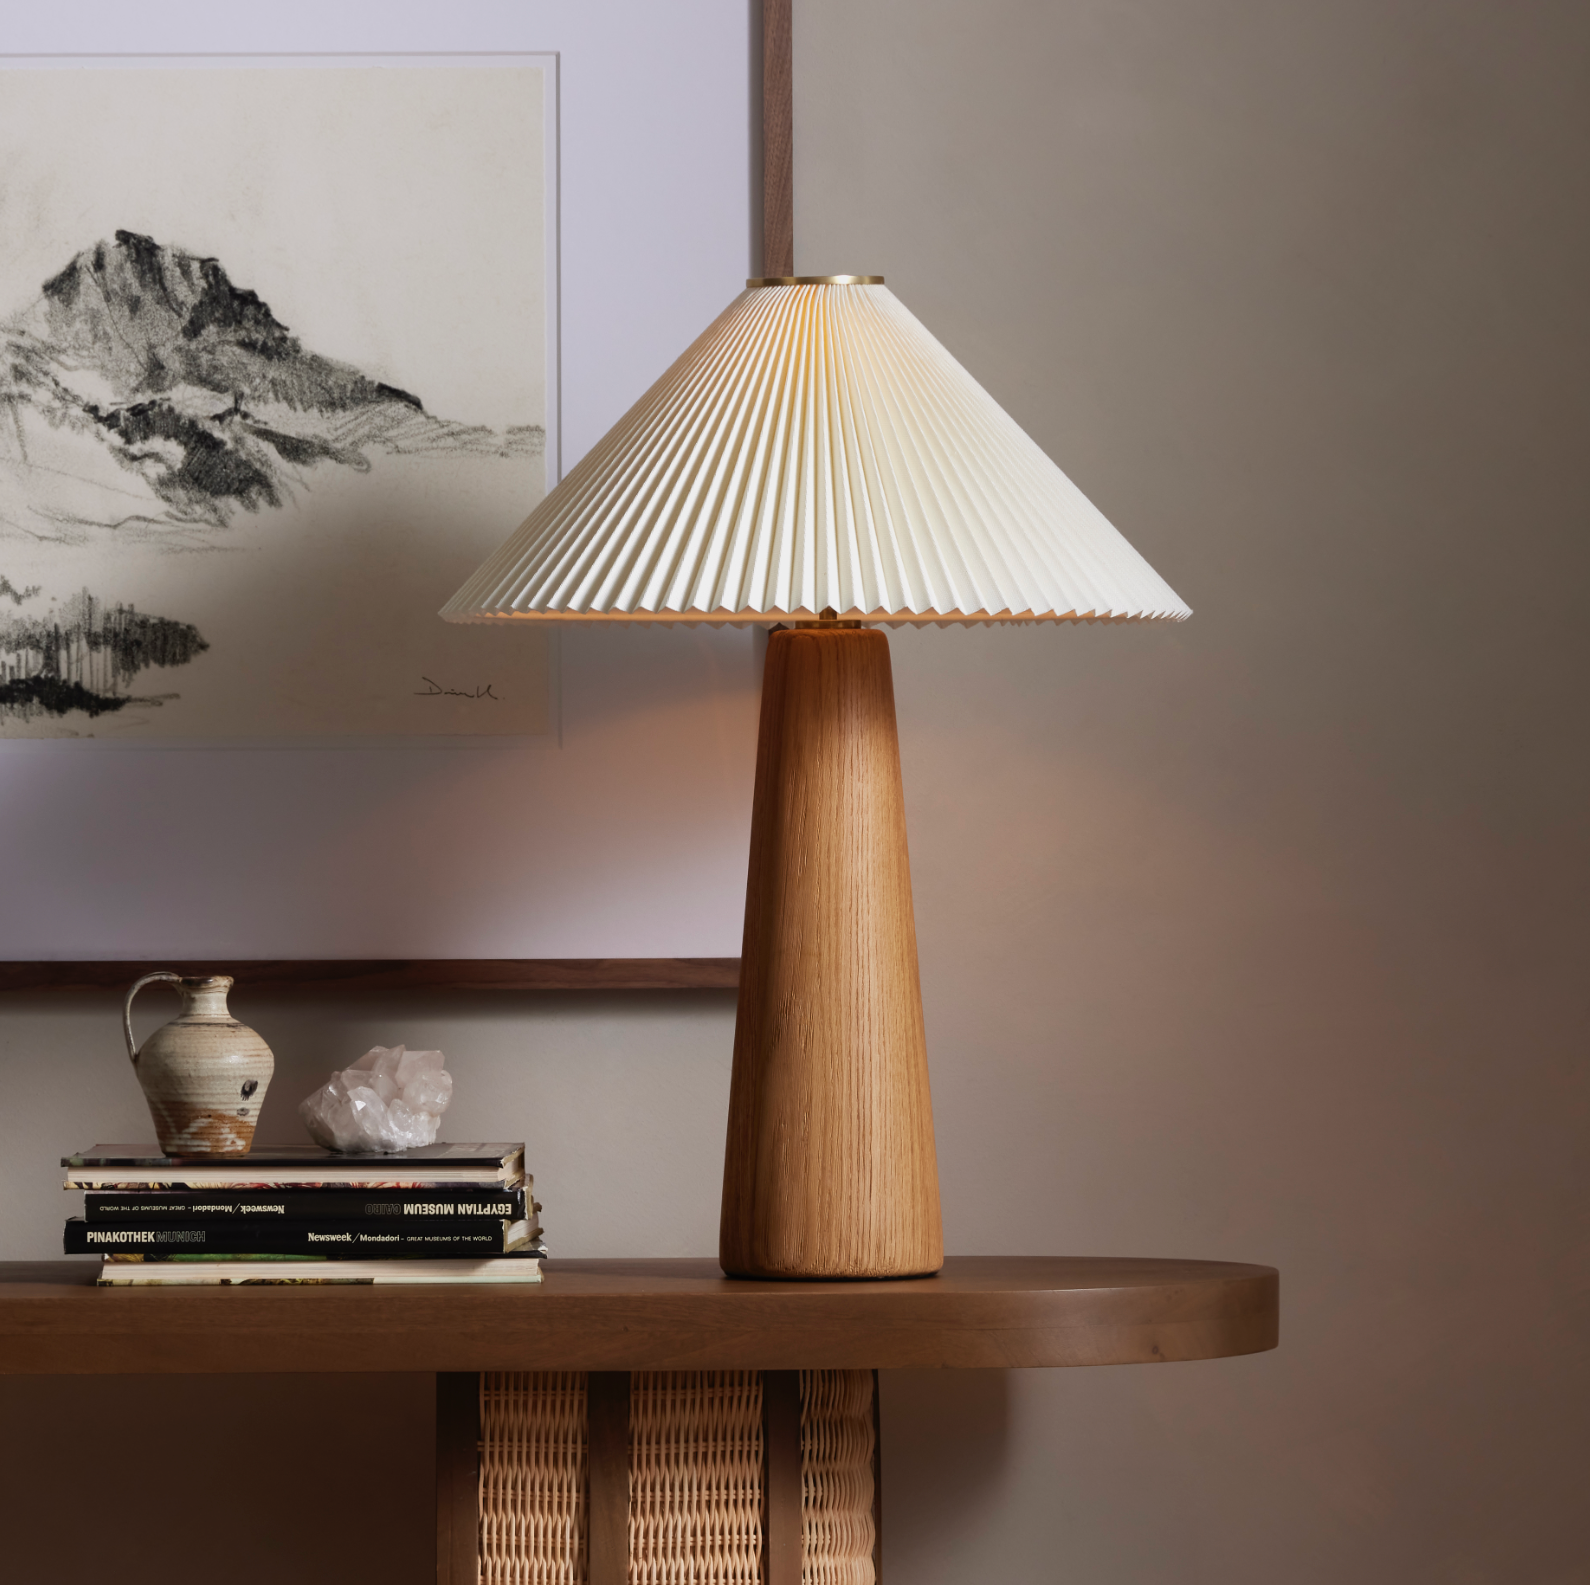 Modern minimal meets traditional. A tapered wood table lamp base is topped with a design-forward pleated shade. Amethyst Home provides interior design, new home construction design consulting, vintage area rugs, and lighting in the Raleigh metro area.